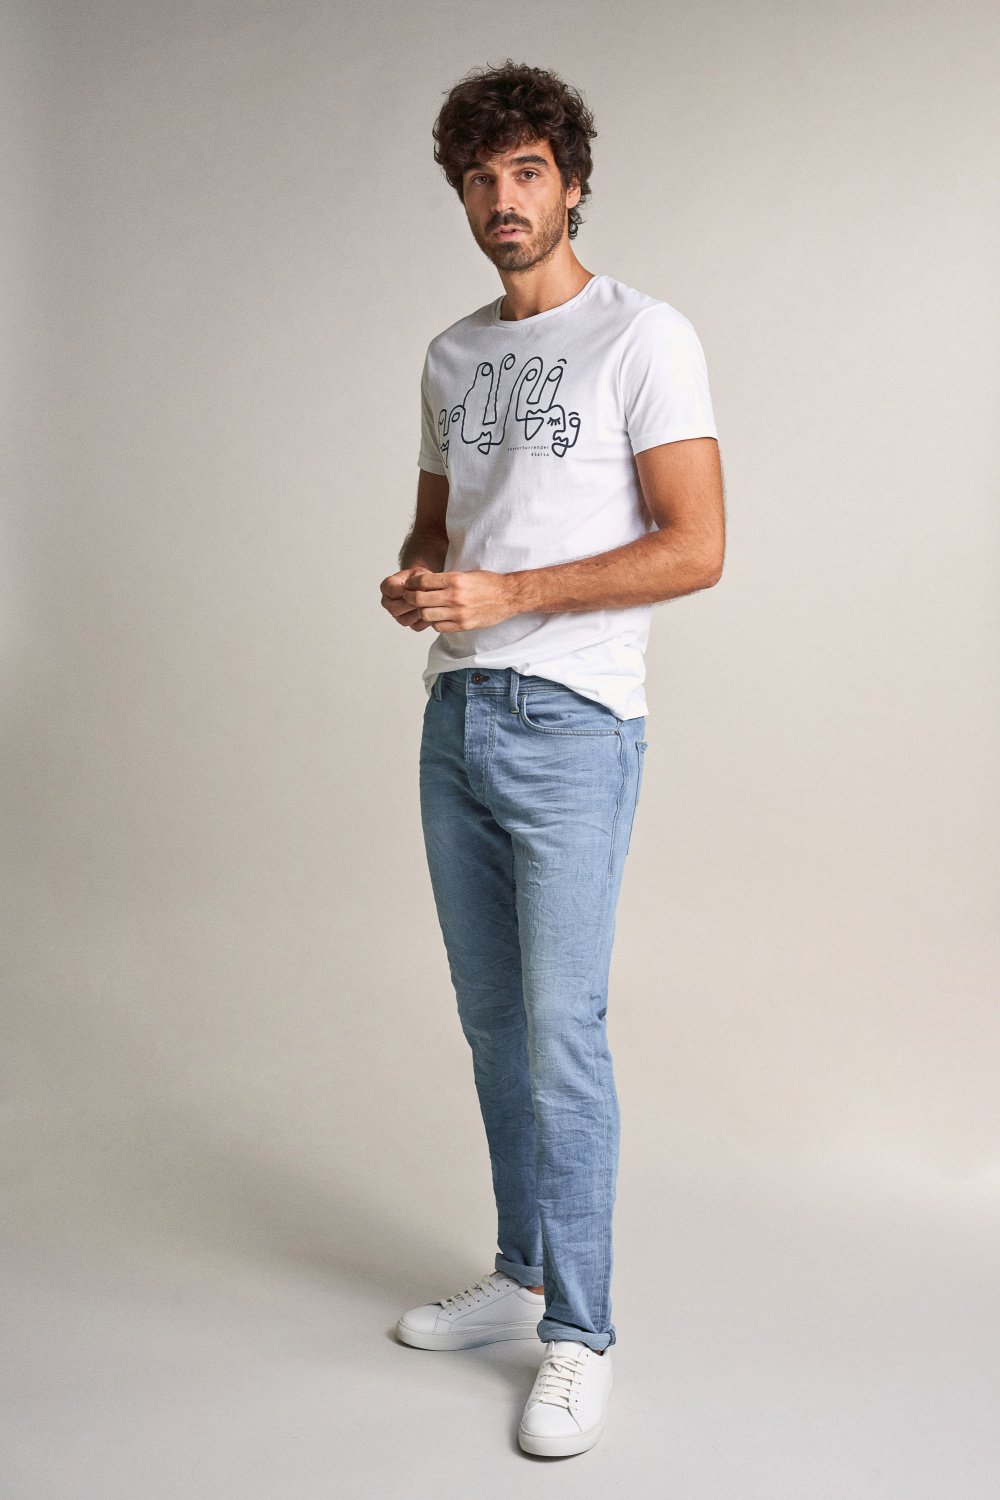 Jeans lima tapered #NeverSurrender Collezione solidale - Salsa